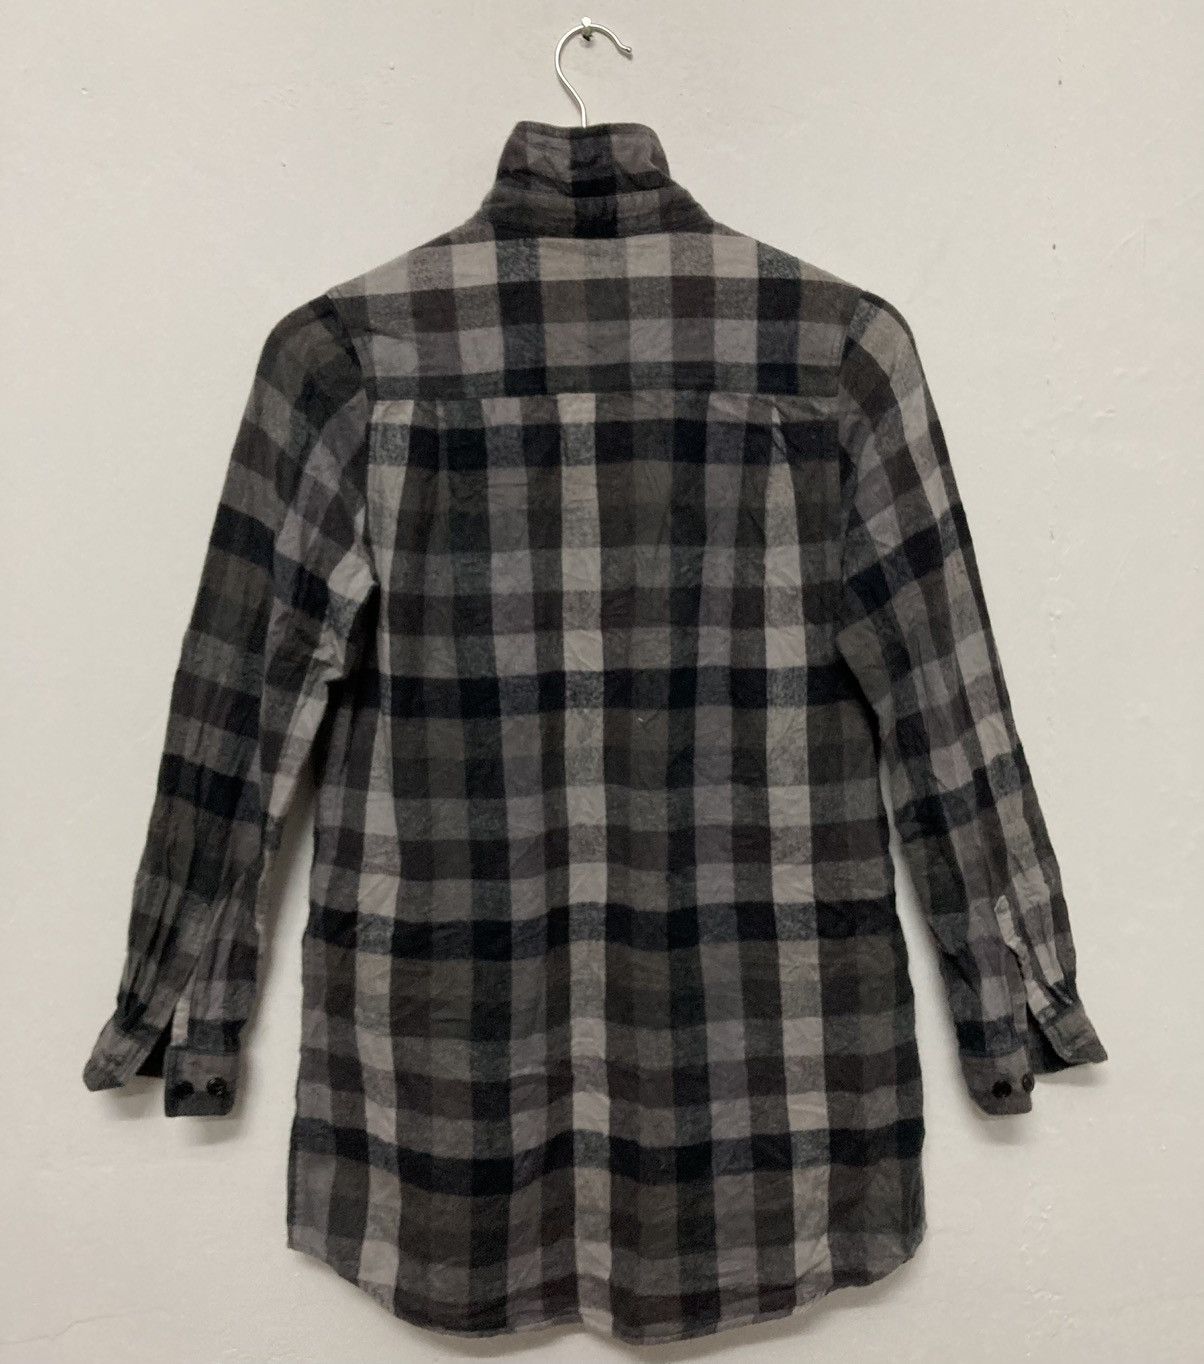 Bape Button Up Checker Flannel Shirt Made in Japan - 2